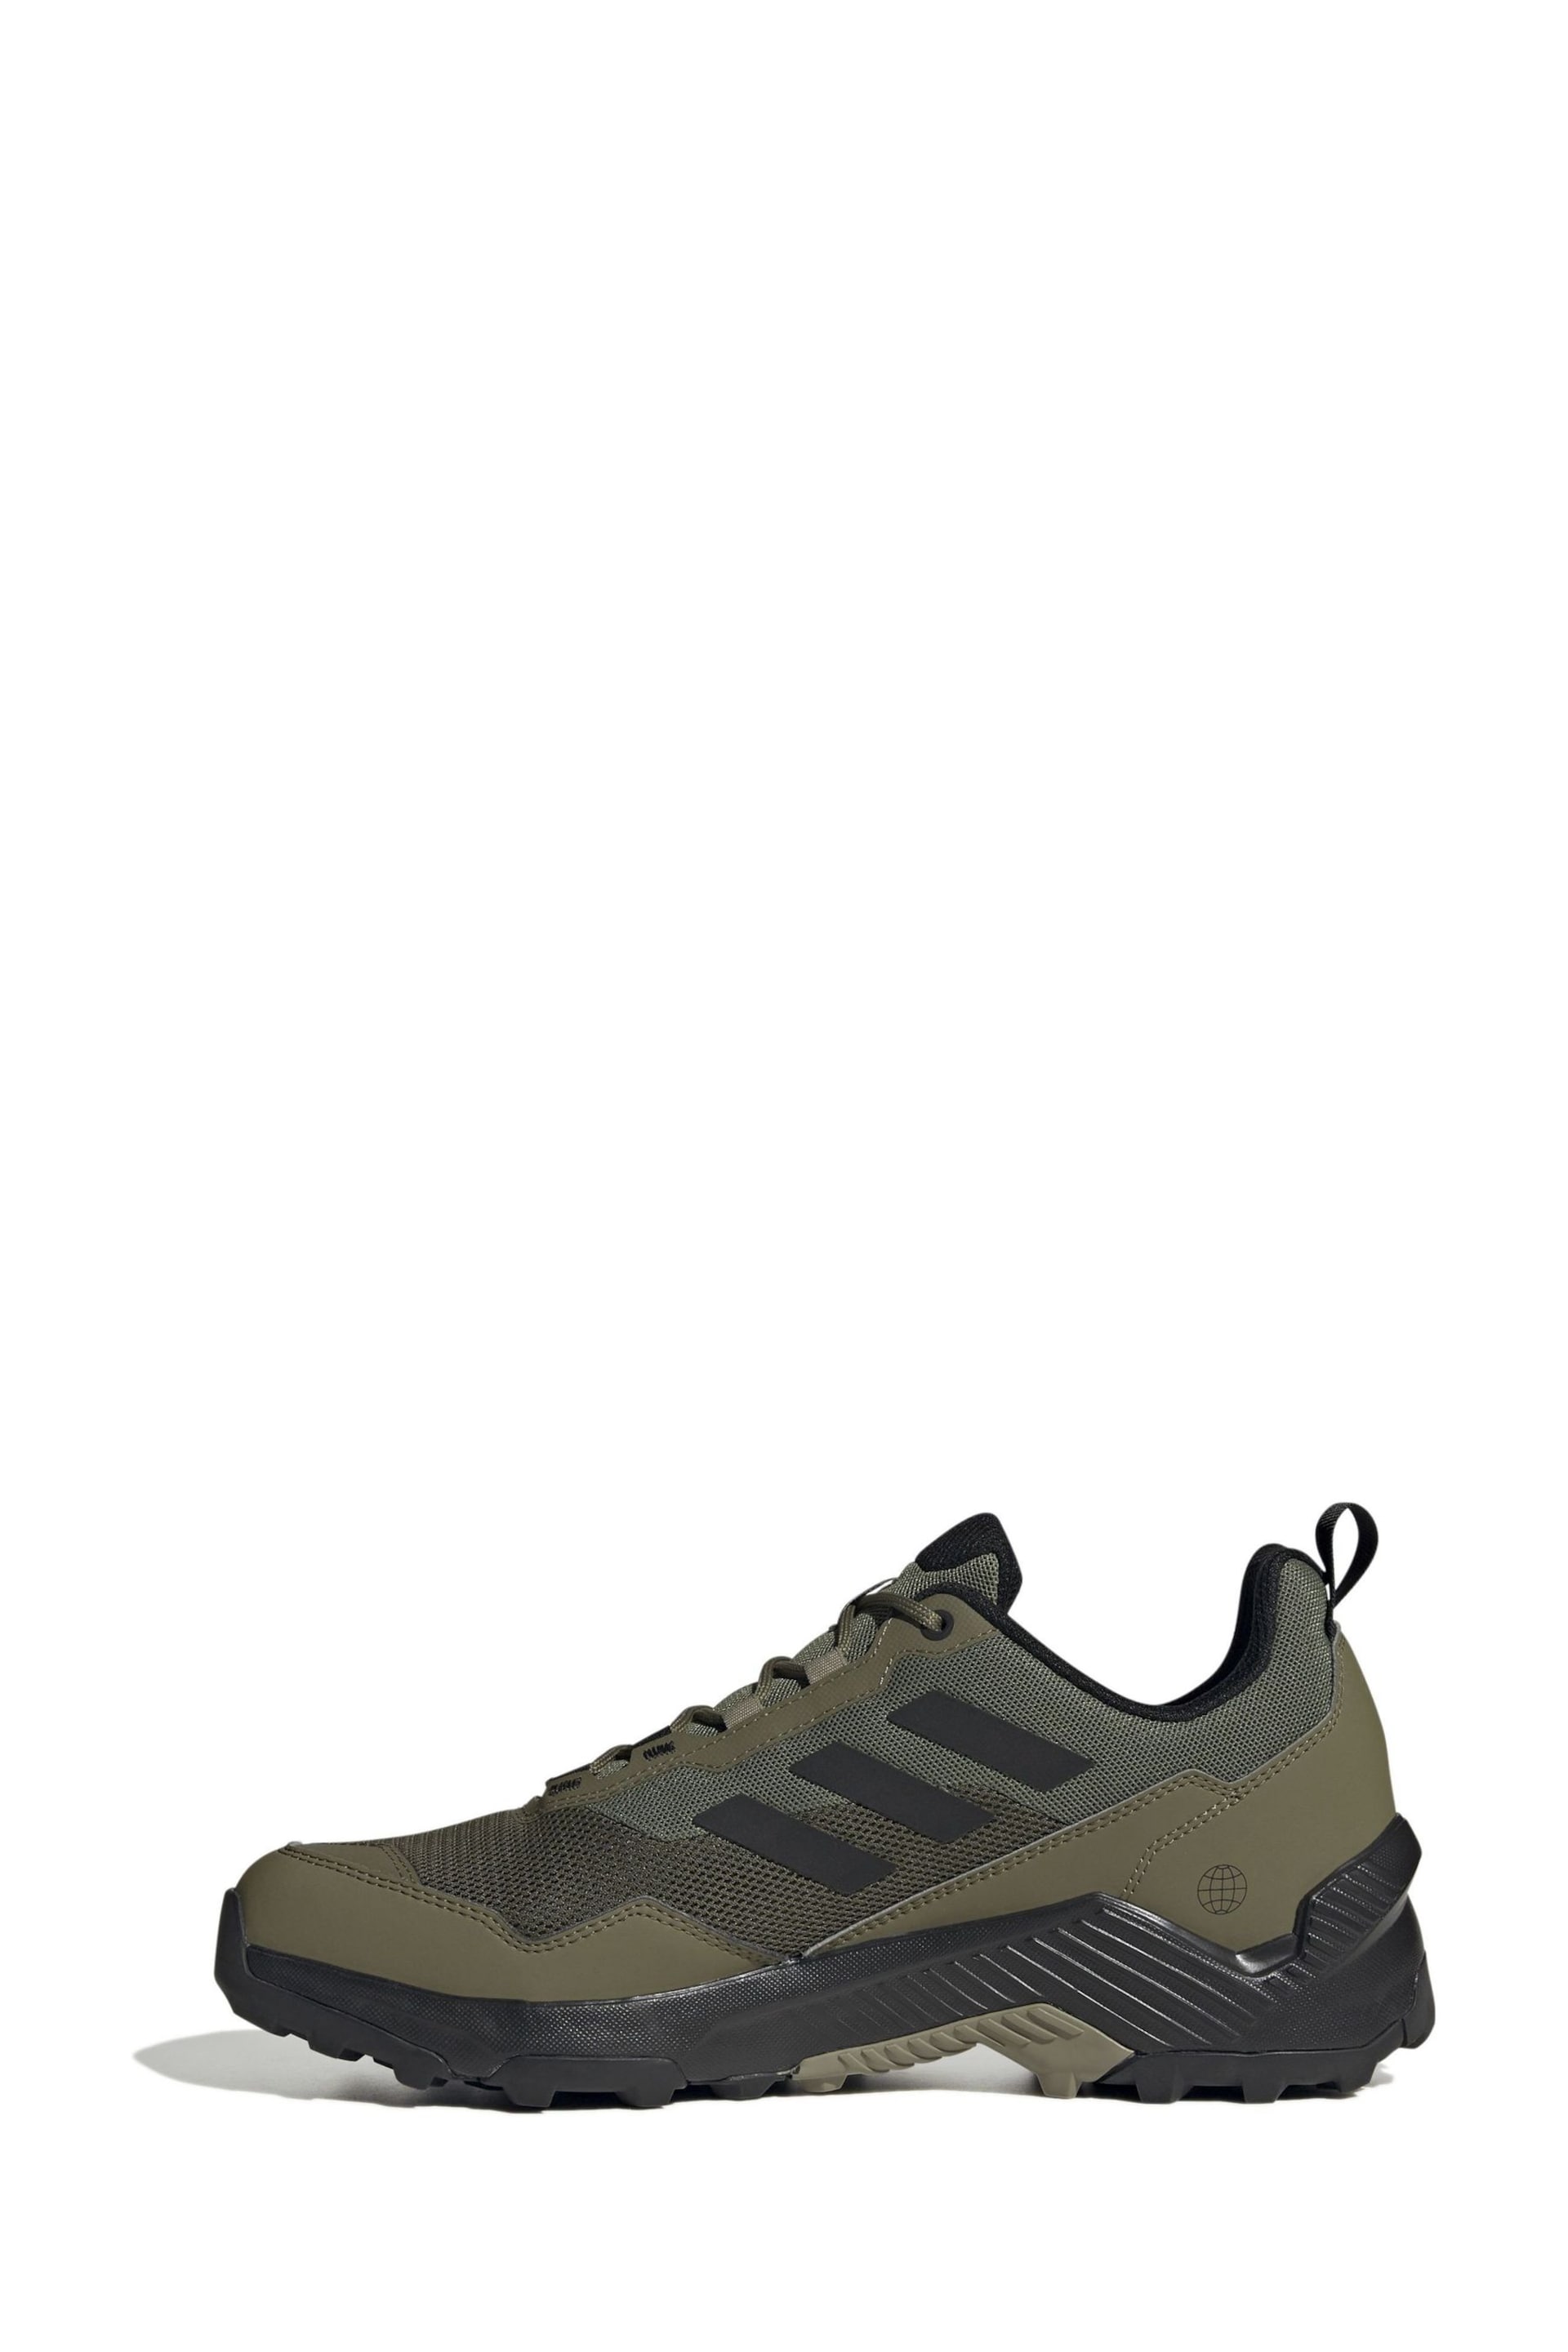 adidas Terrex Eastrail 2 Trainers - Image 2 of 10